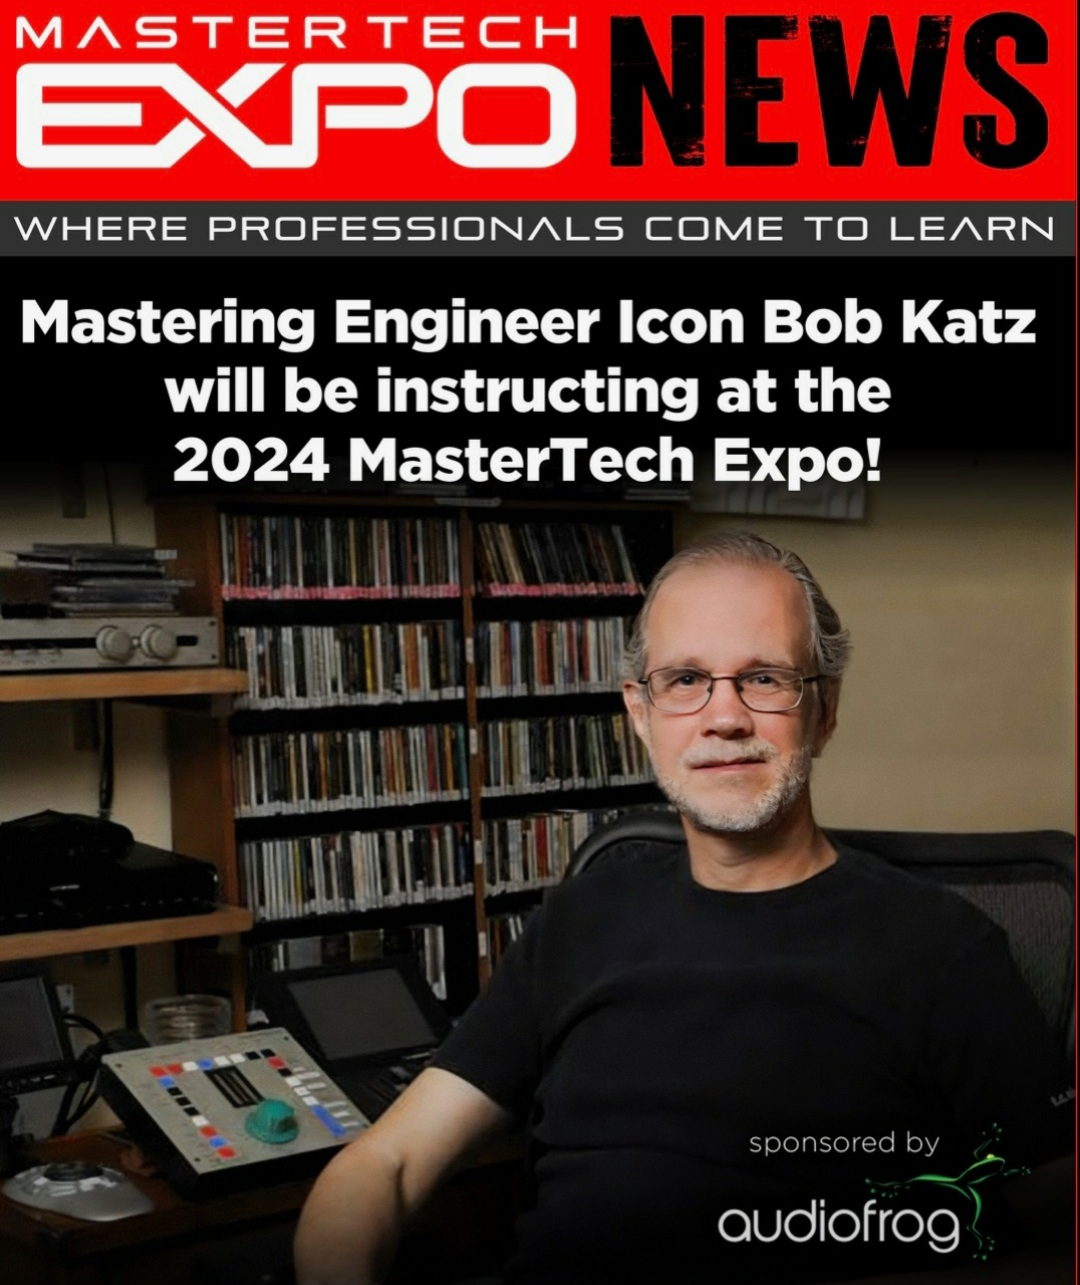 Bob Katz Added to 2024 MasterTech Expo Instructor Lineup THE SHOP